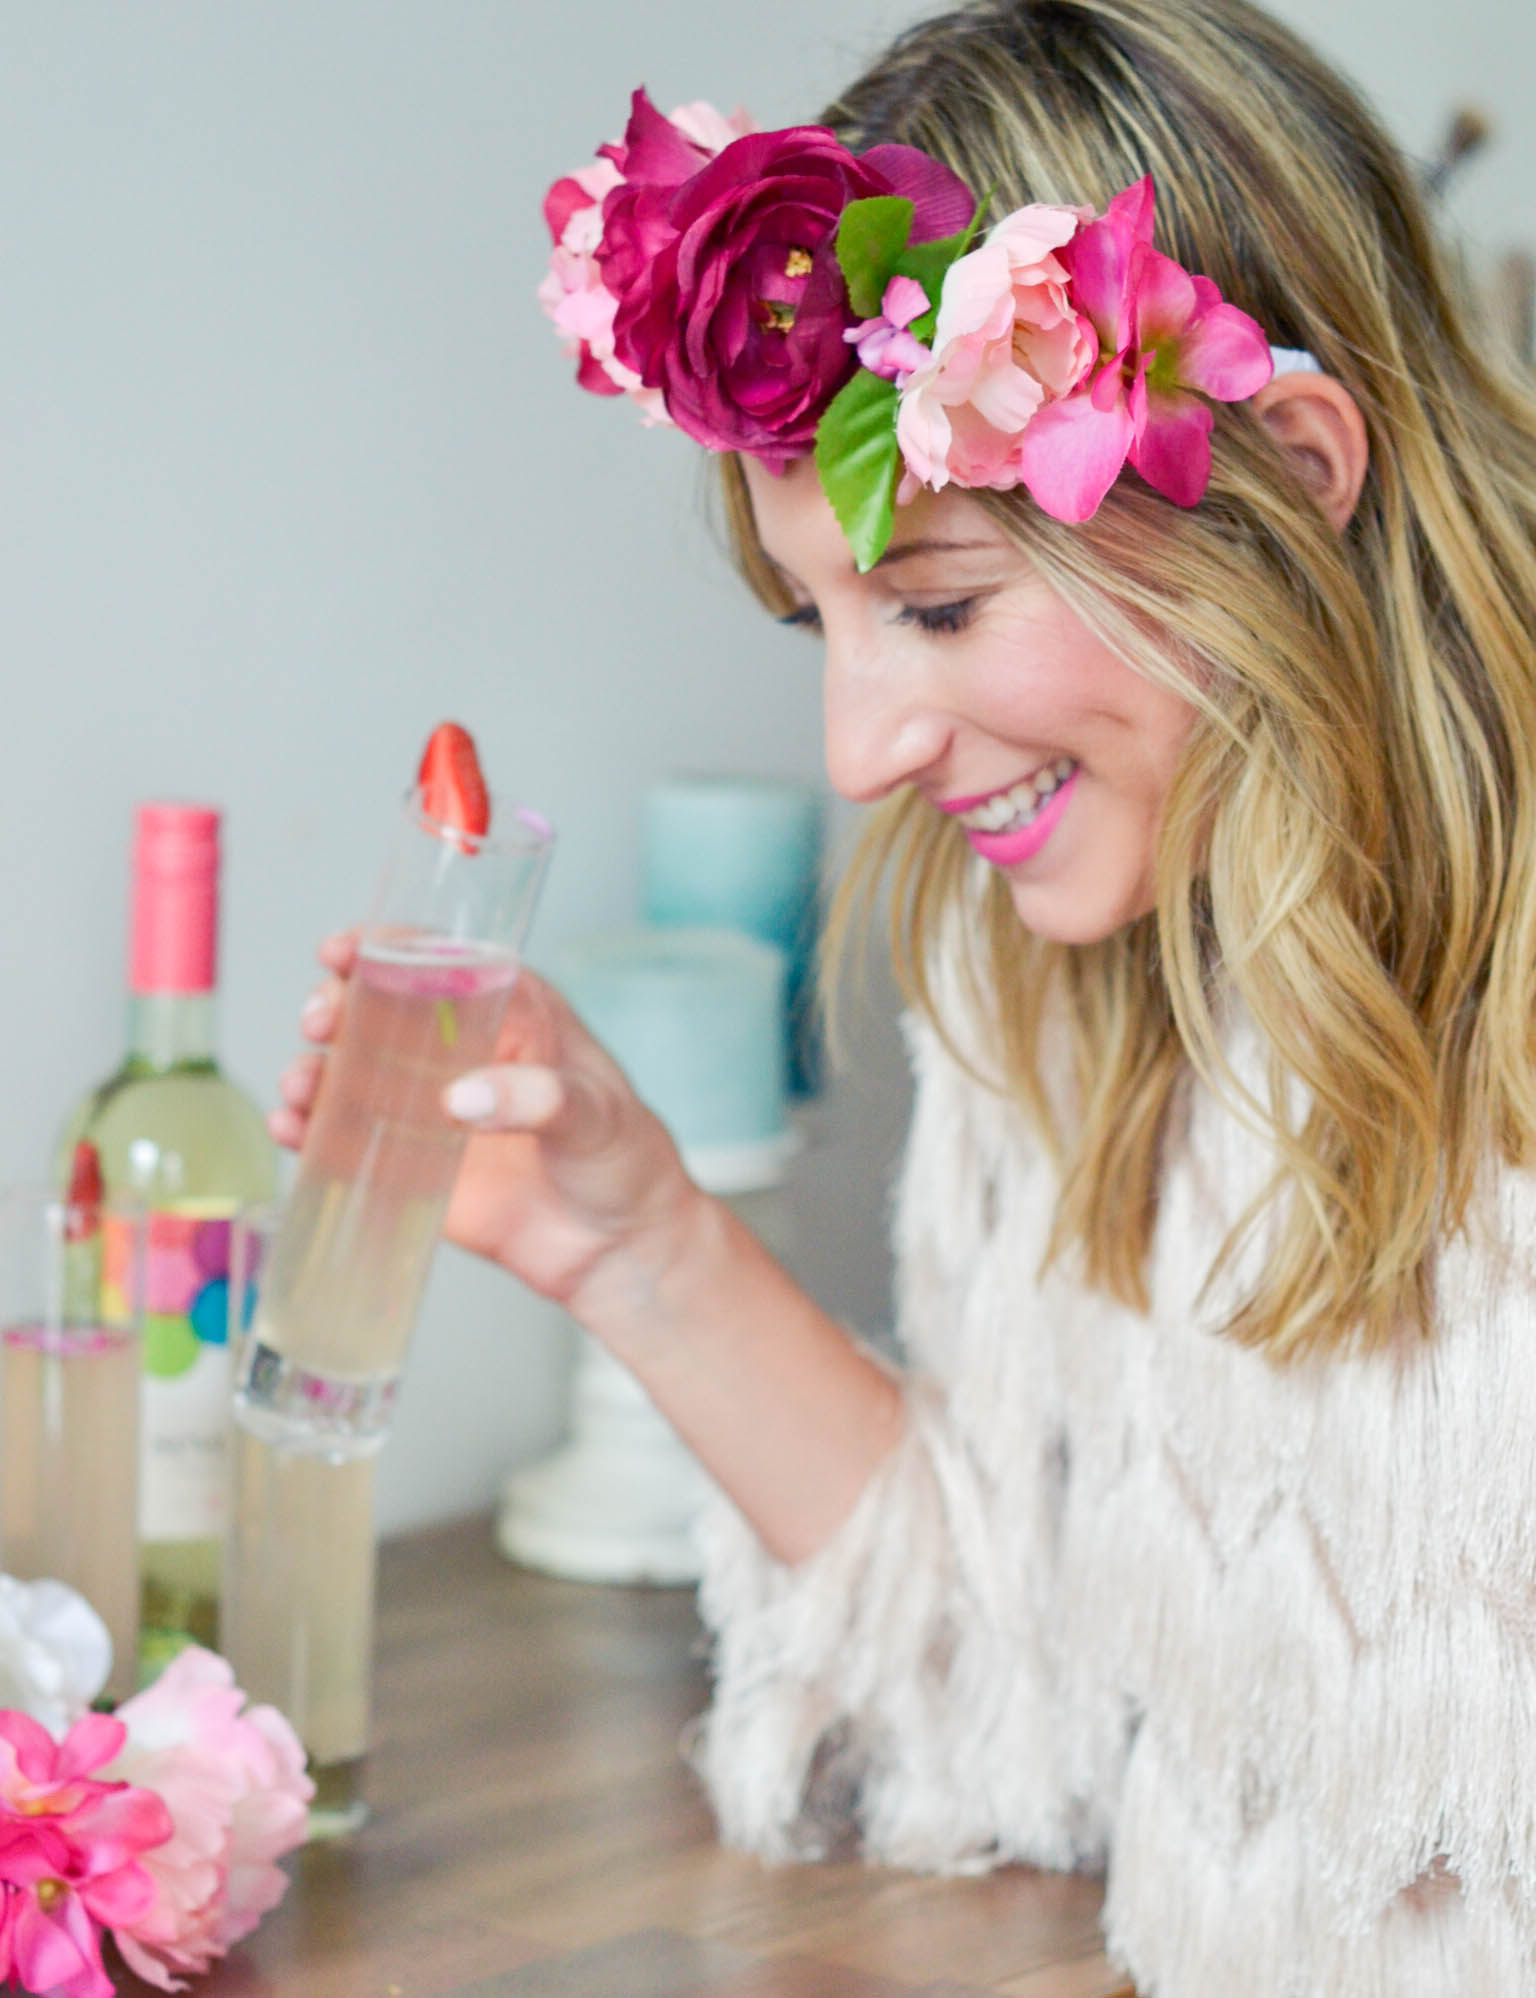 7 Tips for a Budget-Friendly Bachelorette Party